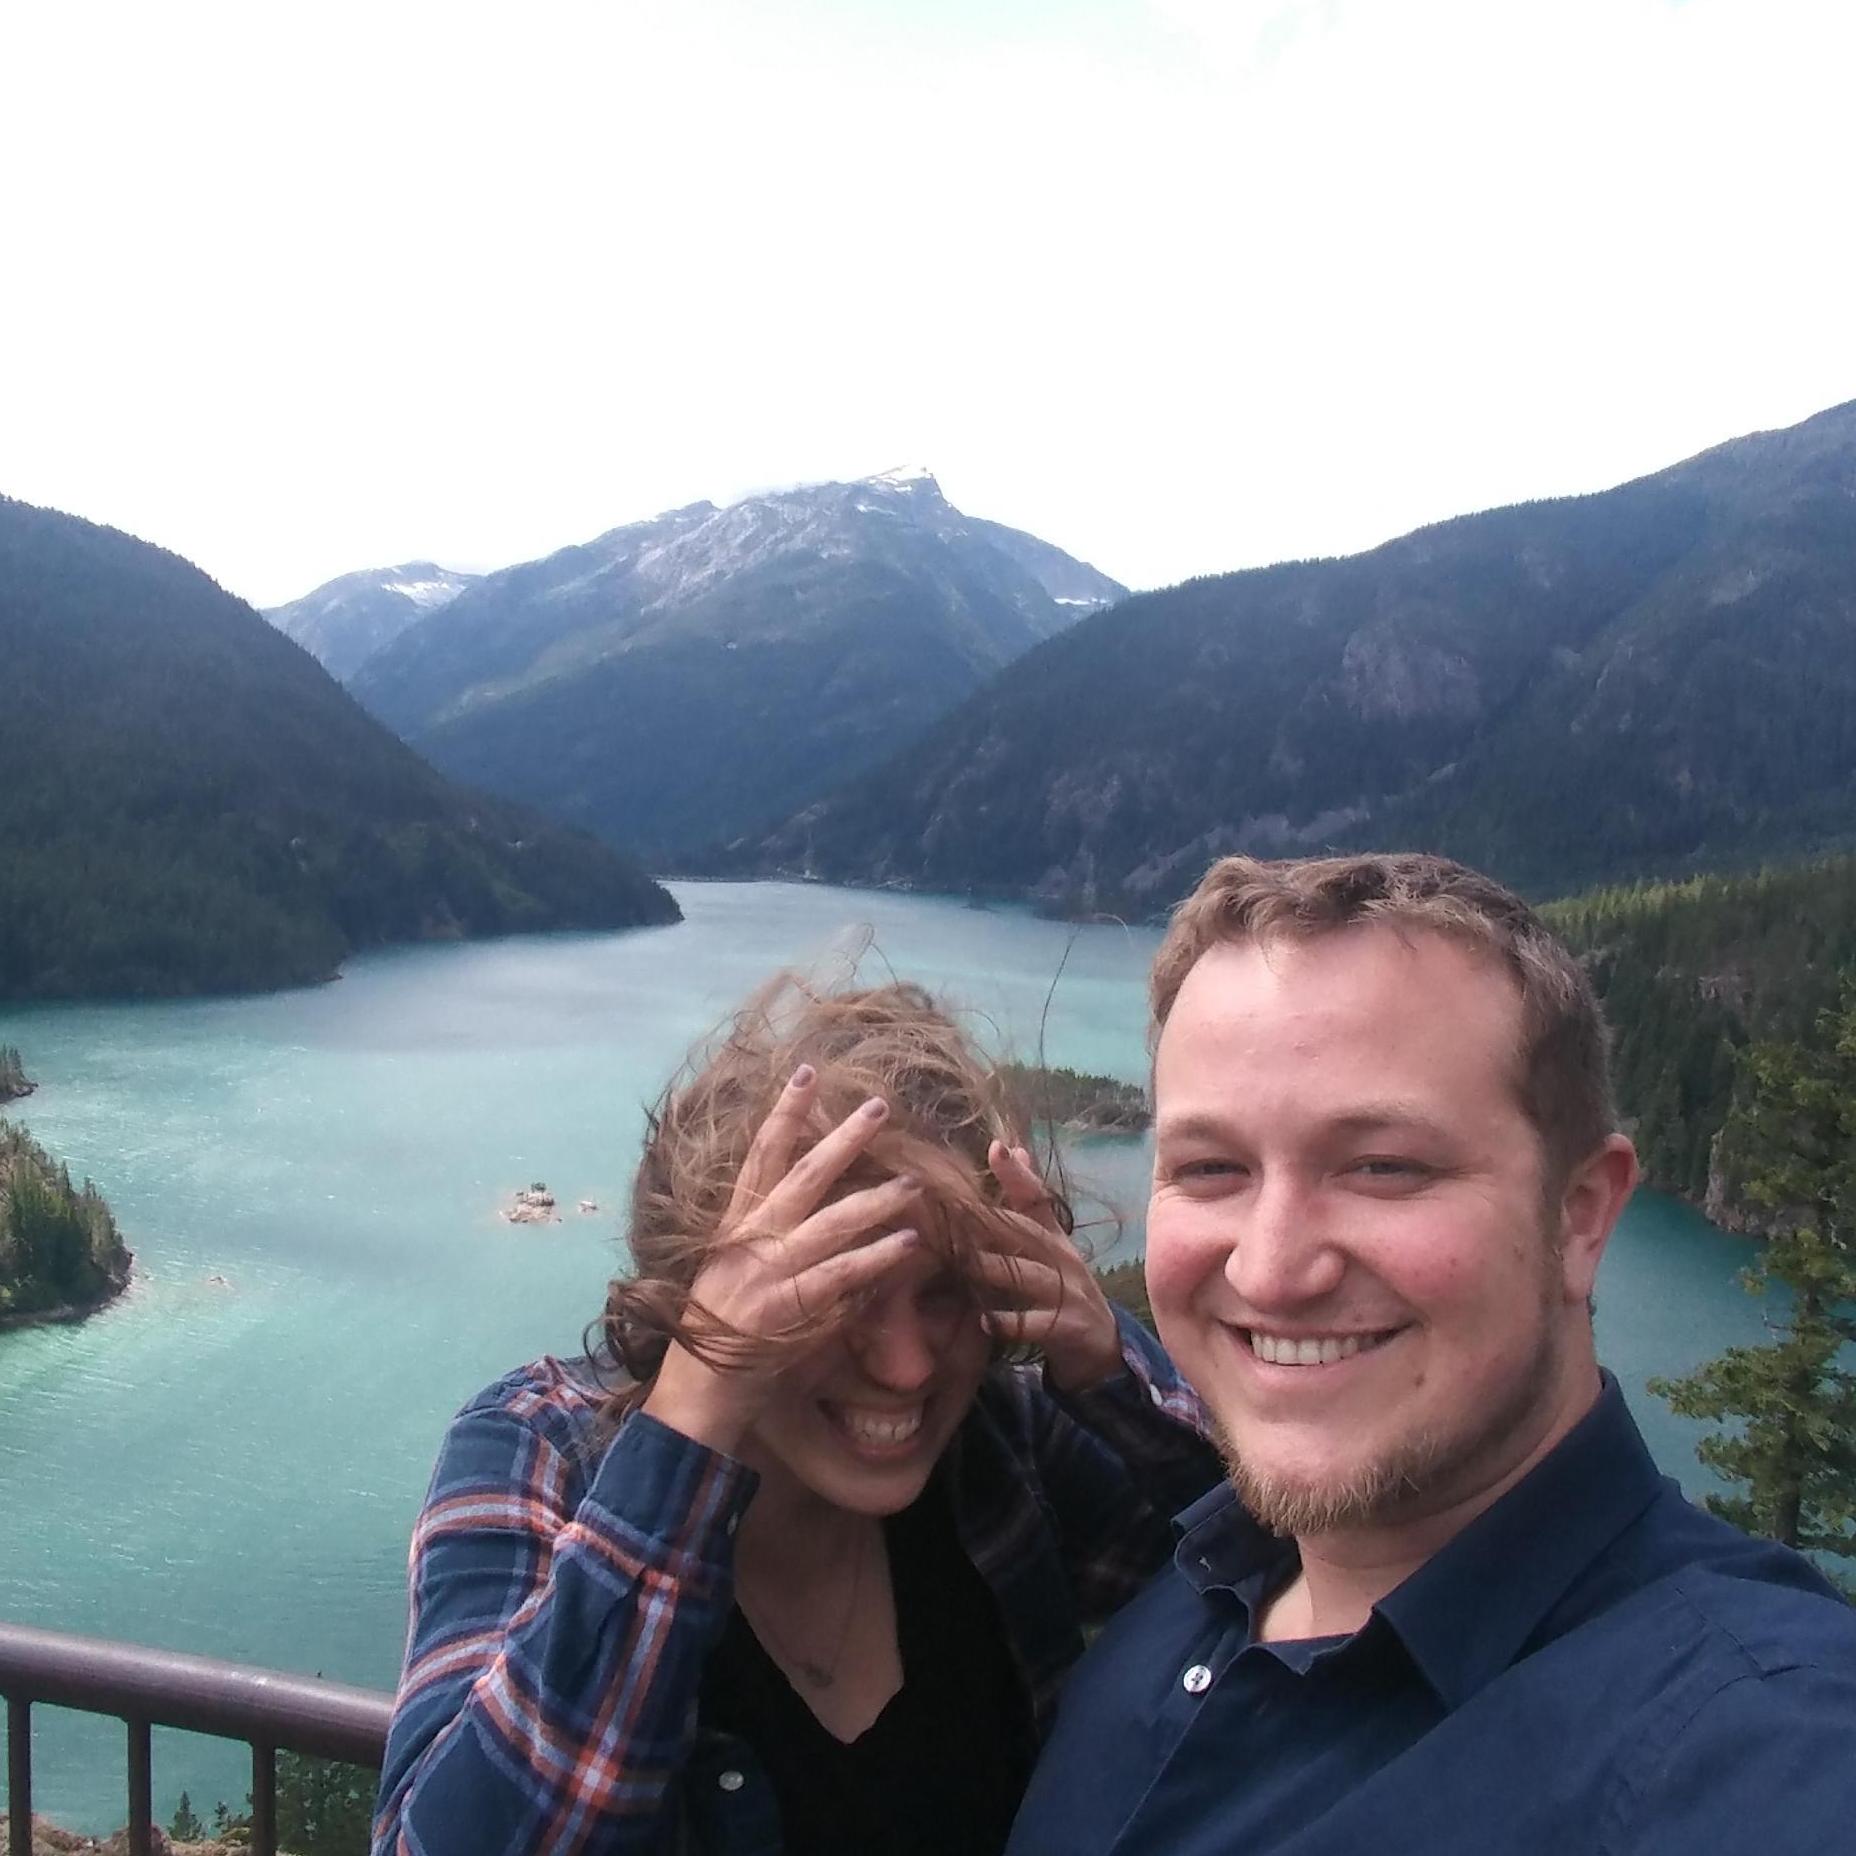 Saylah had wanted to see Diablo lake for a while. 😂